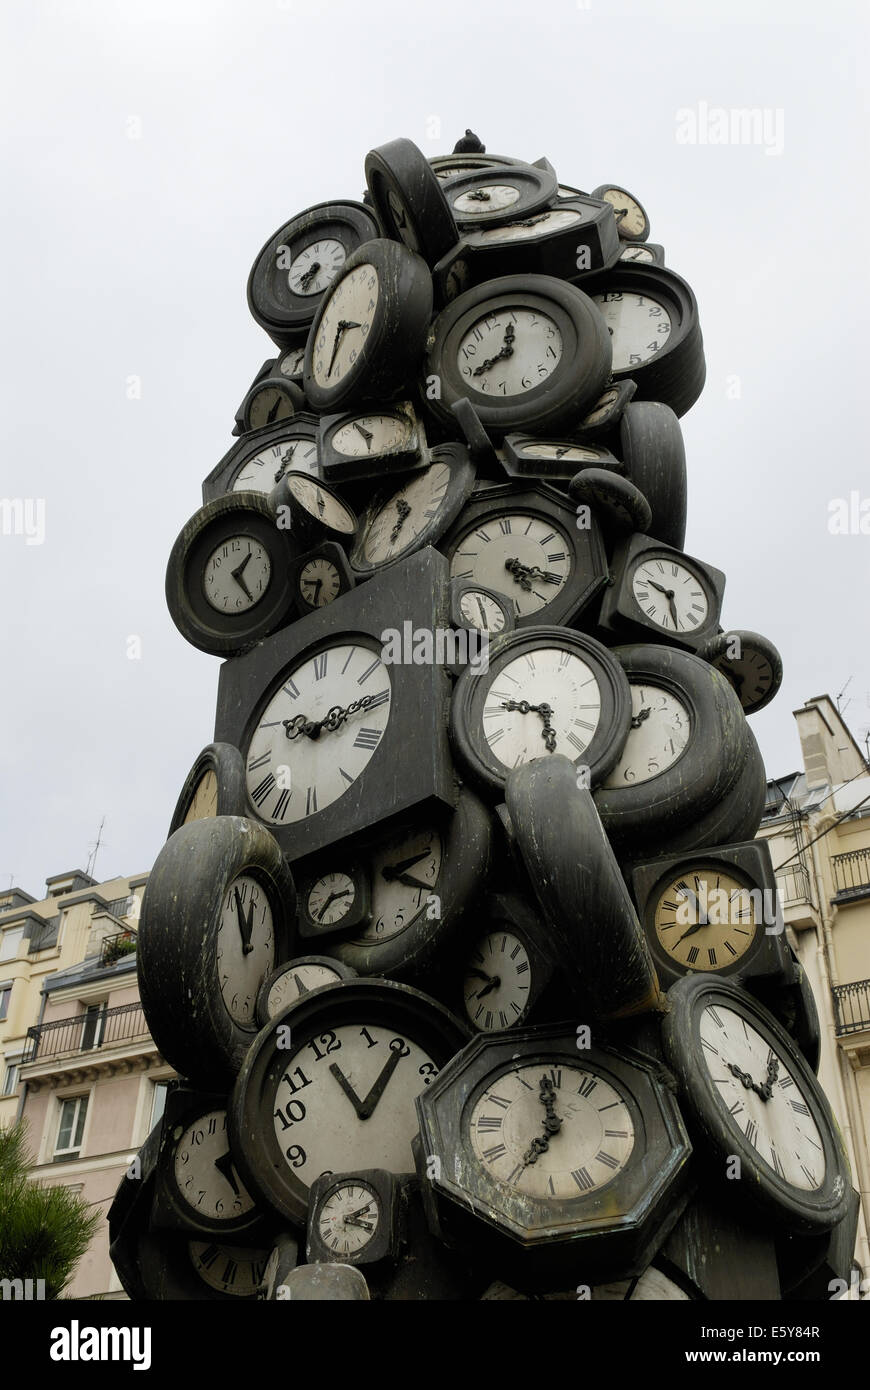 The Clocks by Arman, clock sculpture at Gare St Lazare railway station,  Paris, France Stock Photo - Alamy